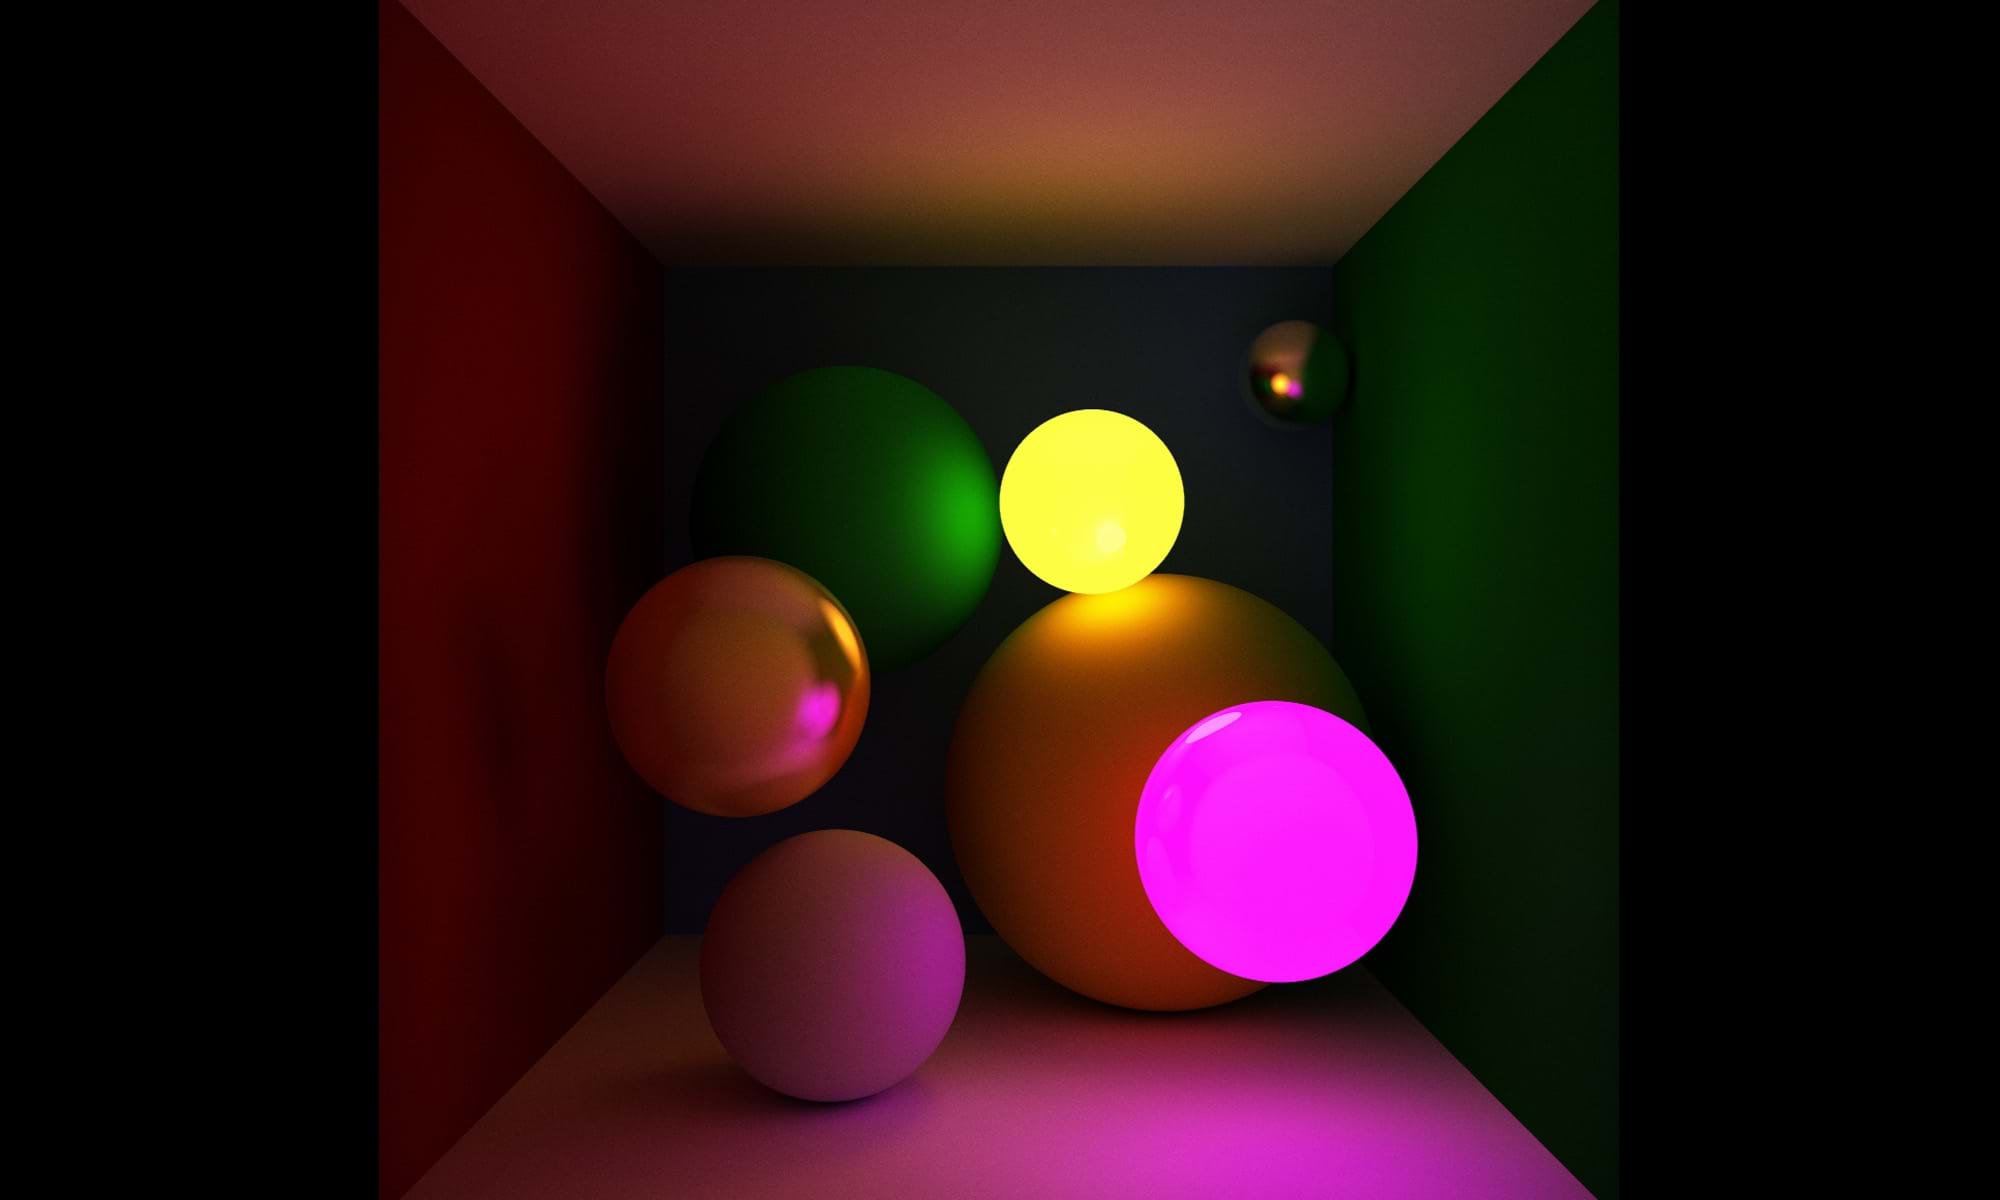 'Optimised Global Illumination With Irradiance Caching Techniques For High Fidelity Real-Time Lighting' is a 2023 Digital Graduate Show project by Angus Dale, a Computer Game Applications Development student at Abertay University.